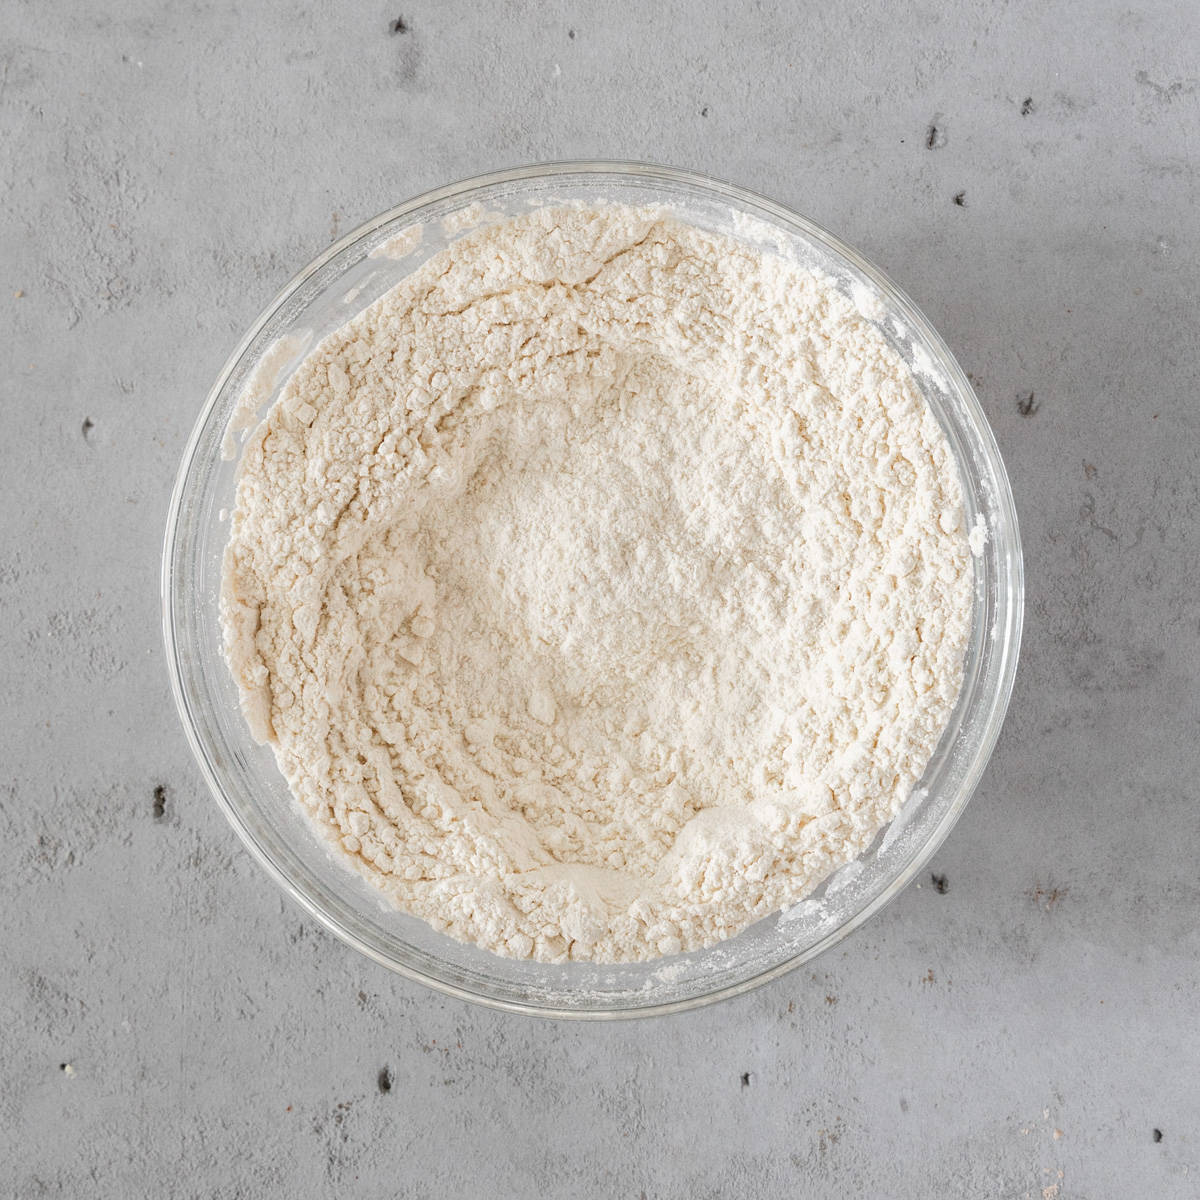 the dry ingredients combined in a glass bowl on a grey background.